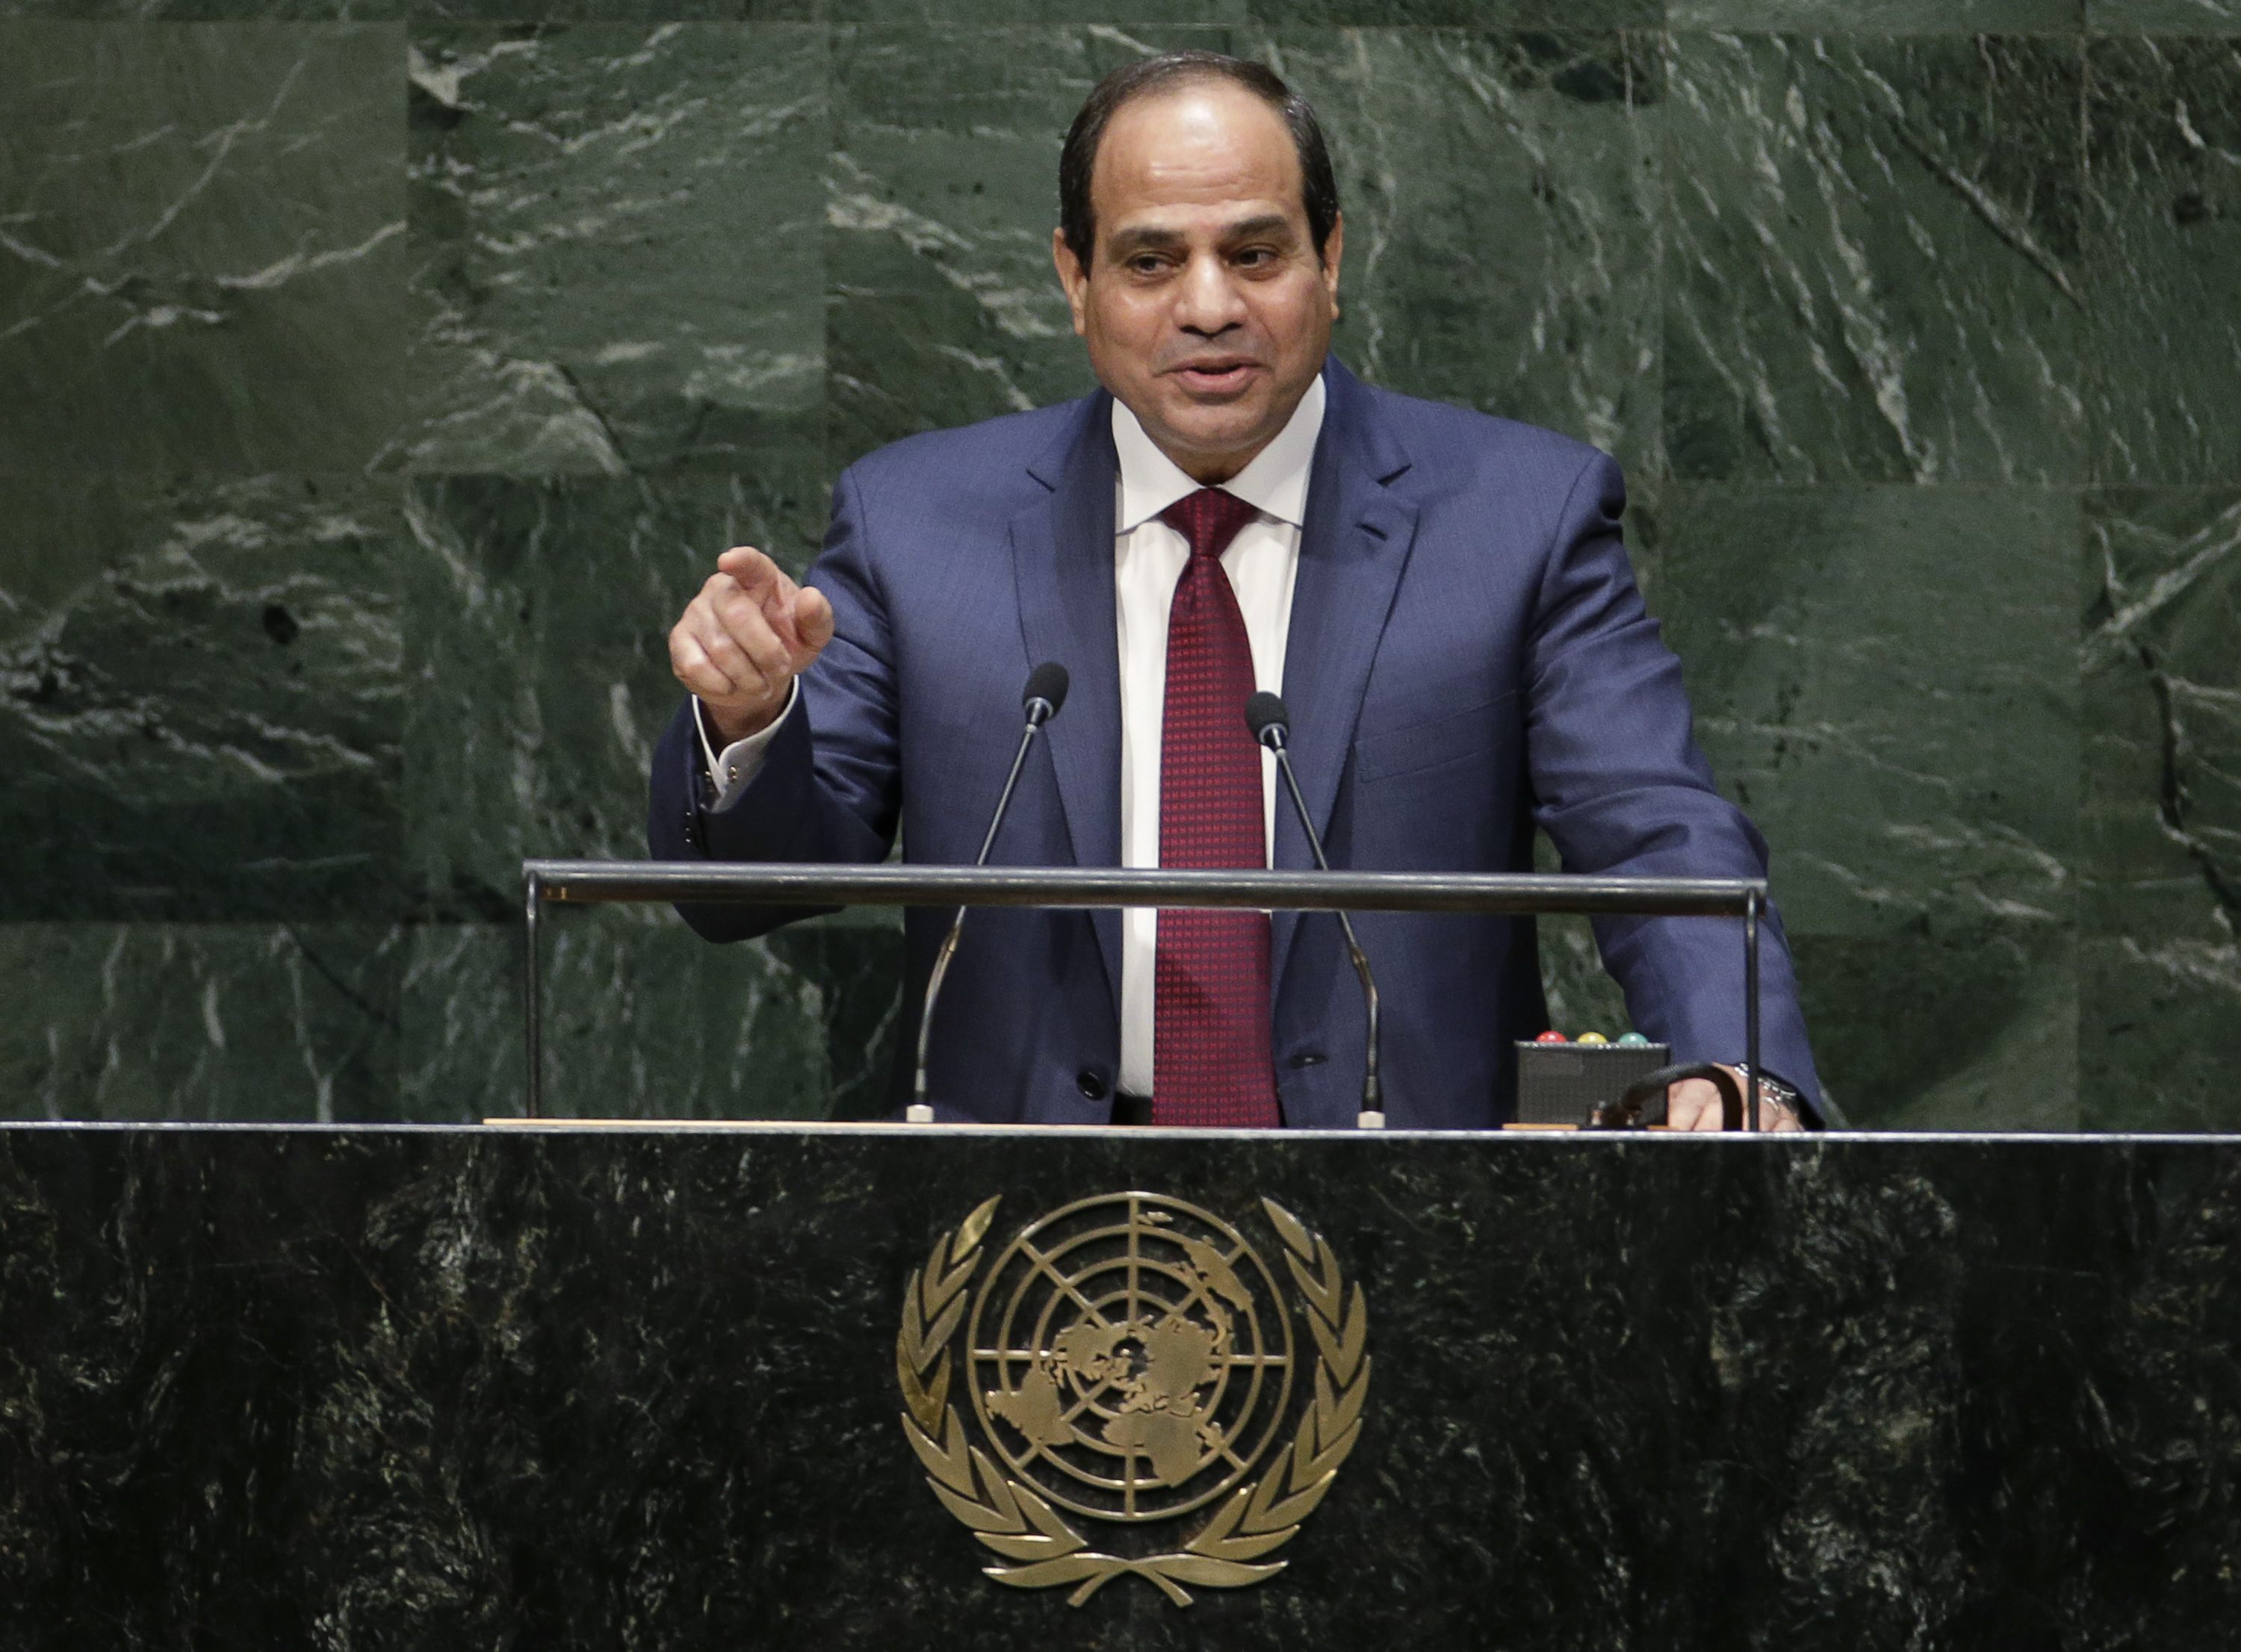 Egypt's President Abdel Fattah al-Sisi addresses the 69th United Nations General Assembly at U.N. headquarters in New York, September 24, 2014. REUTERS/Mike Segar (UNITED STATES - Tags: POLITICS)